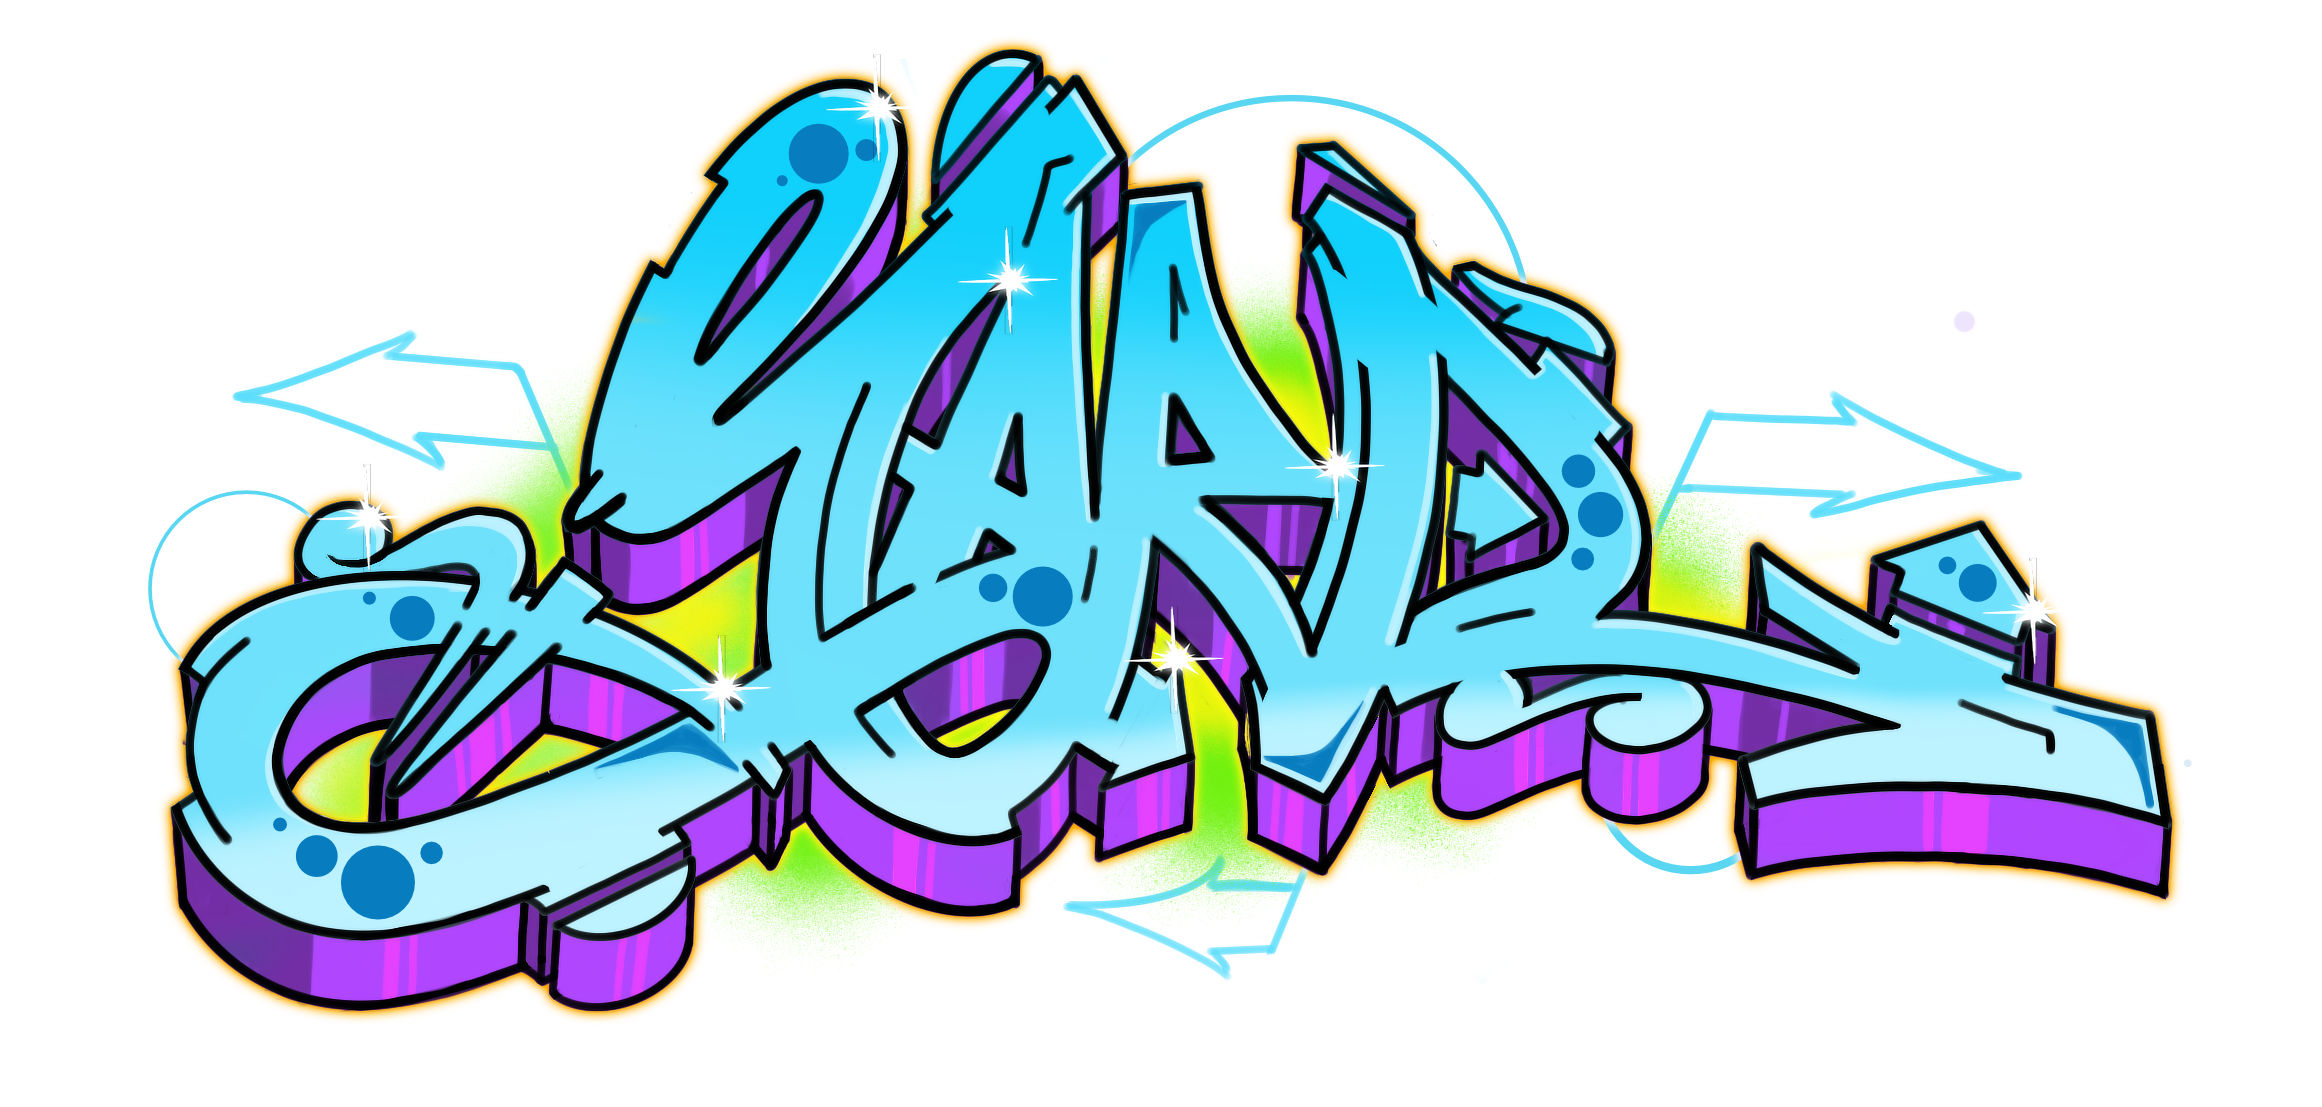 How to Draw “Yard” in Graffiti in 11 Steps